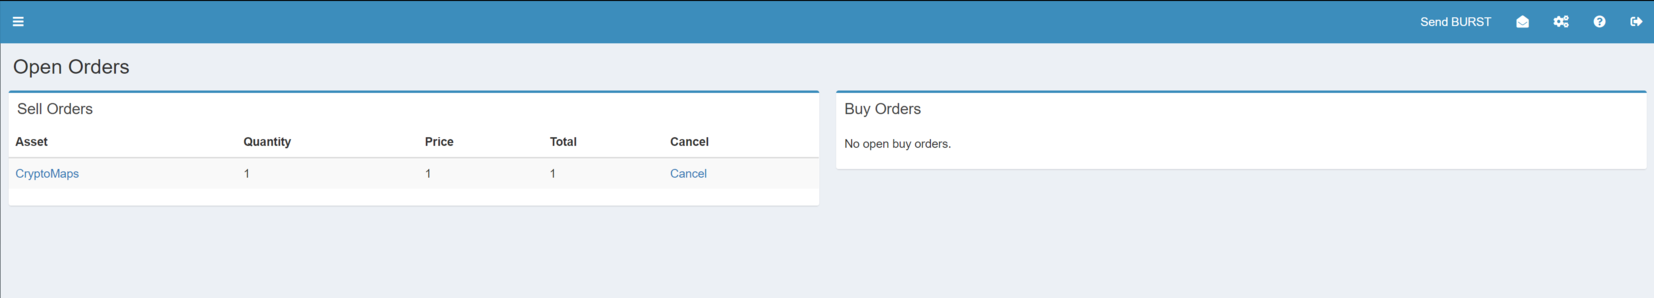 Image showing account holders open orders in the Burstcoin wallet